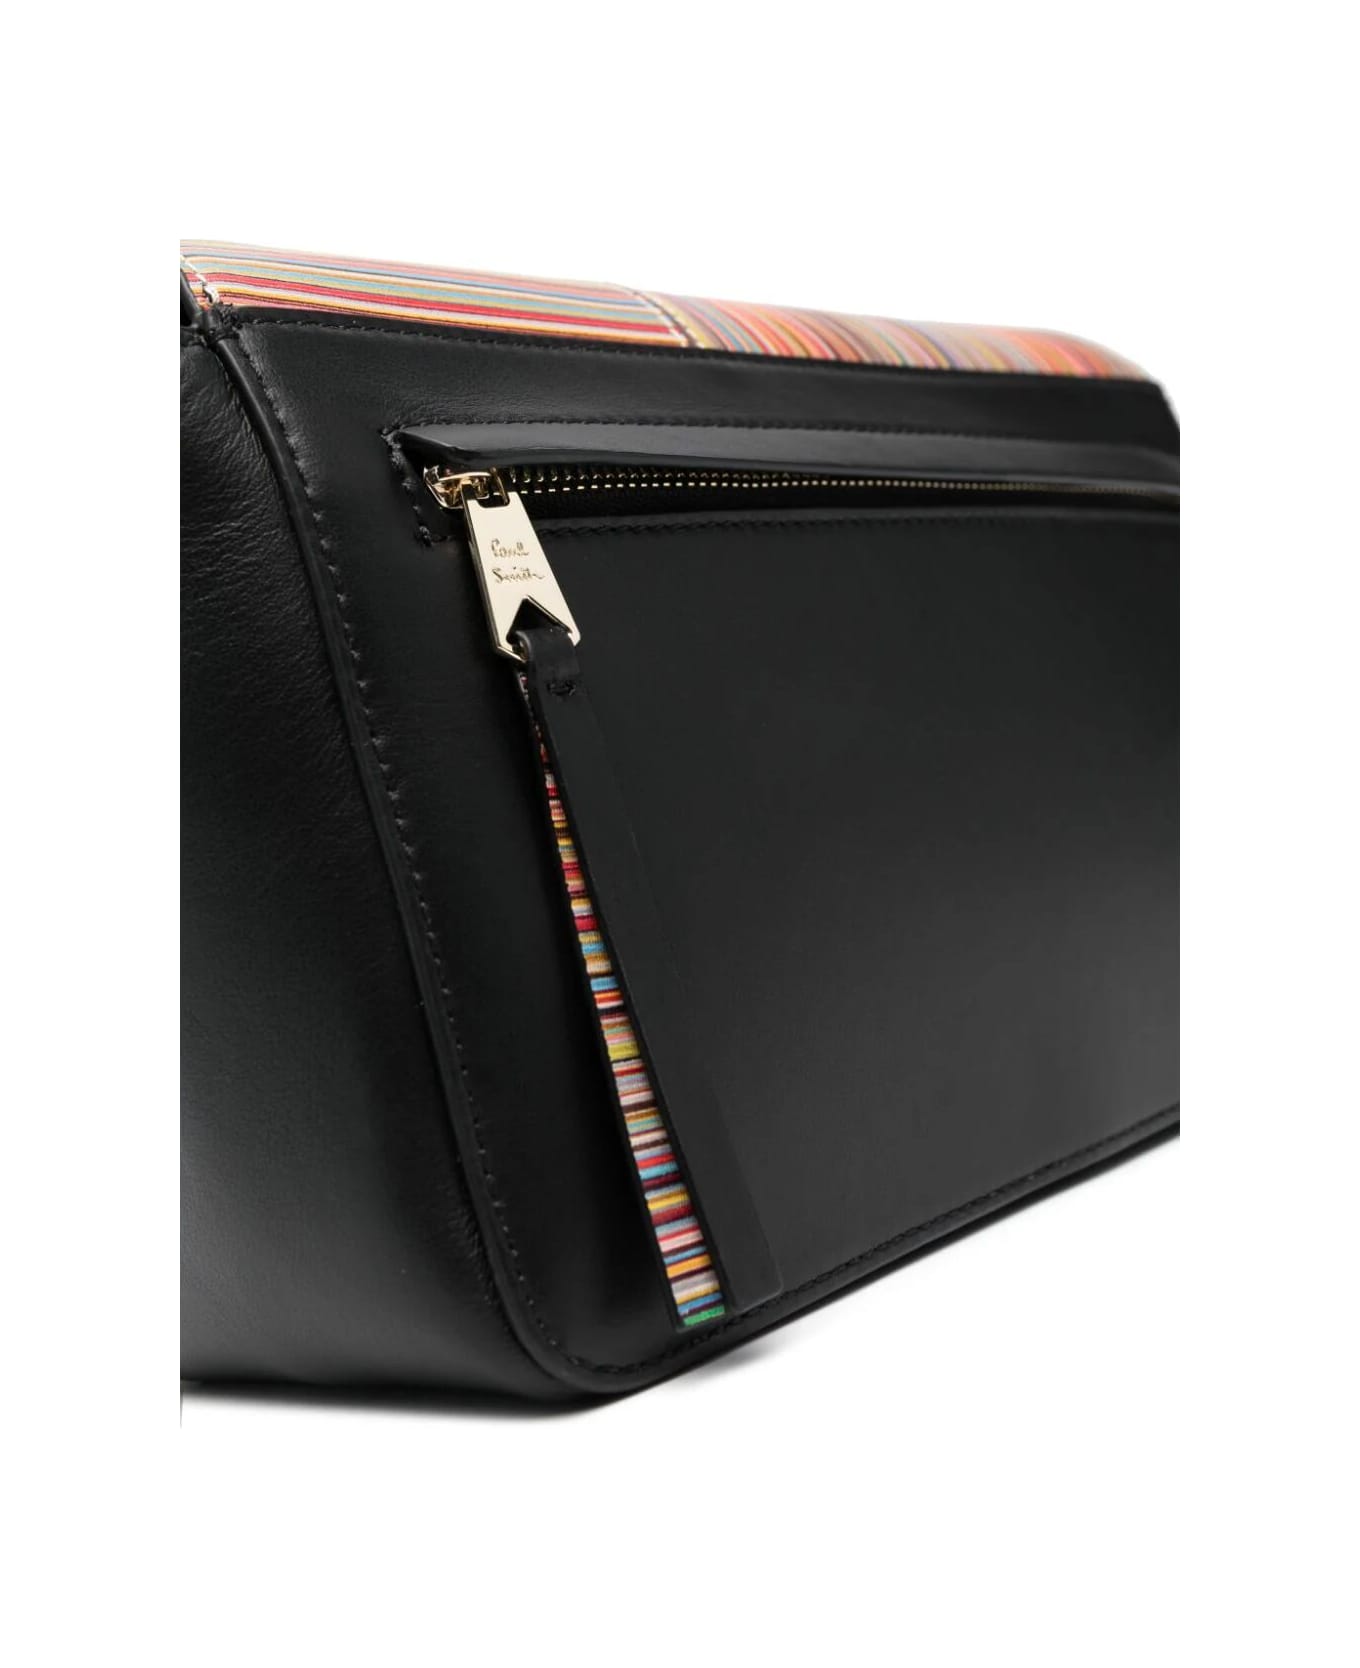 PS by Paul Smith Bag Flap Xbody - Multi